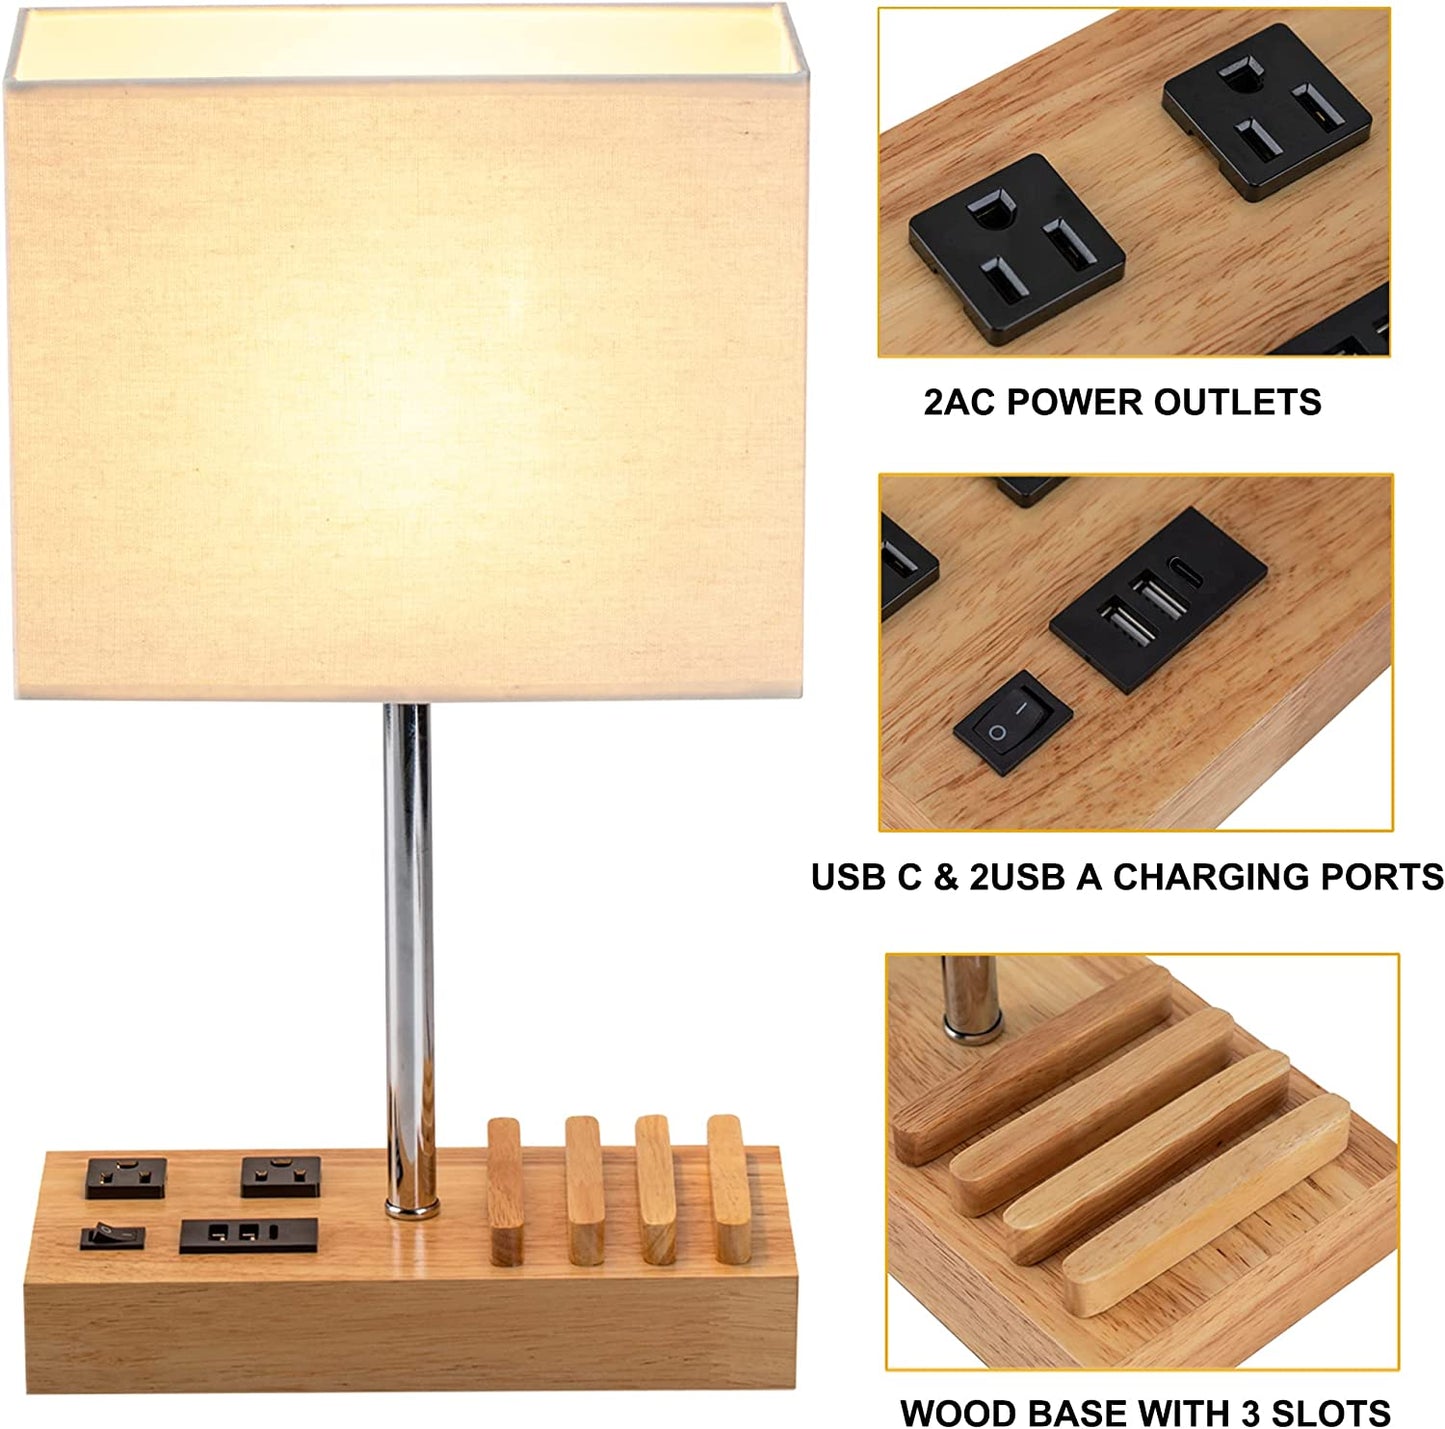 Smart Desk Lamp Powerhouse: 3 USB Ports, 2 AC Outlets, 3 Phone Stands, Elegant Nightstand Illumination with Natural Wooden Base and Stylish Cream Linen Shade